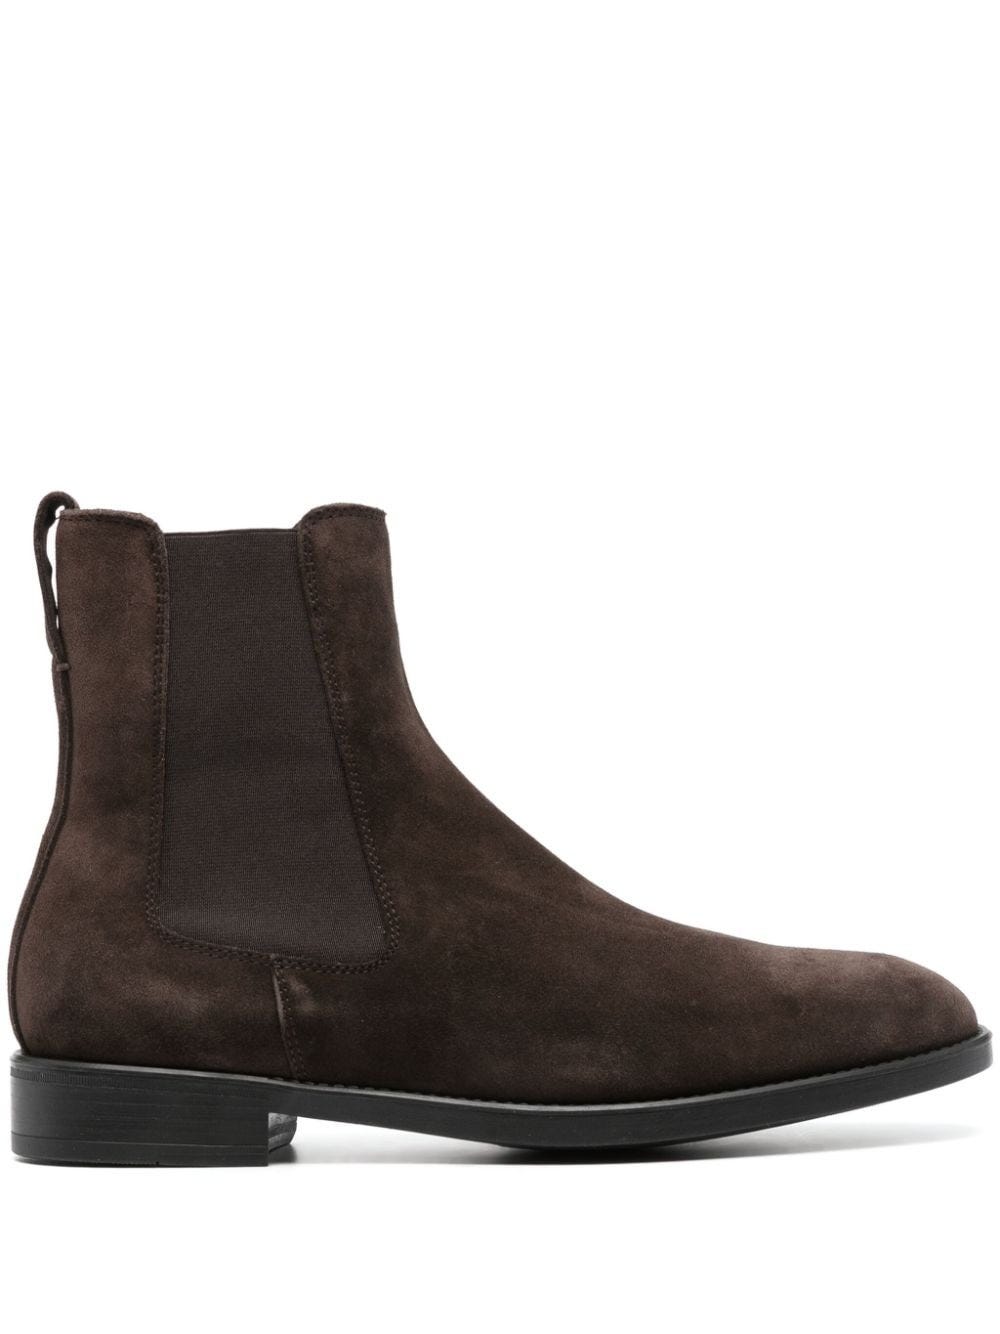 TOM FORD SUEDE ANKLE BOOTS